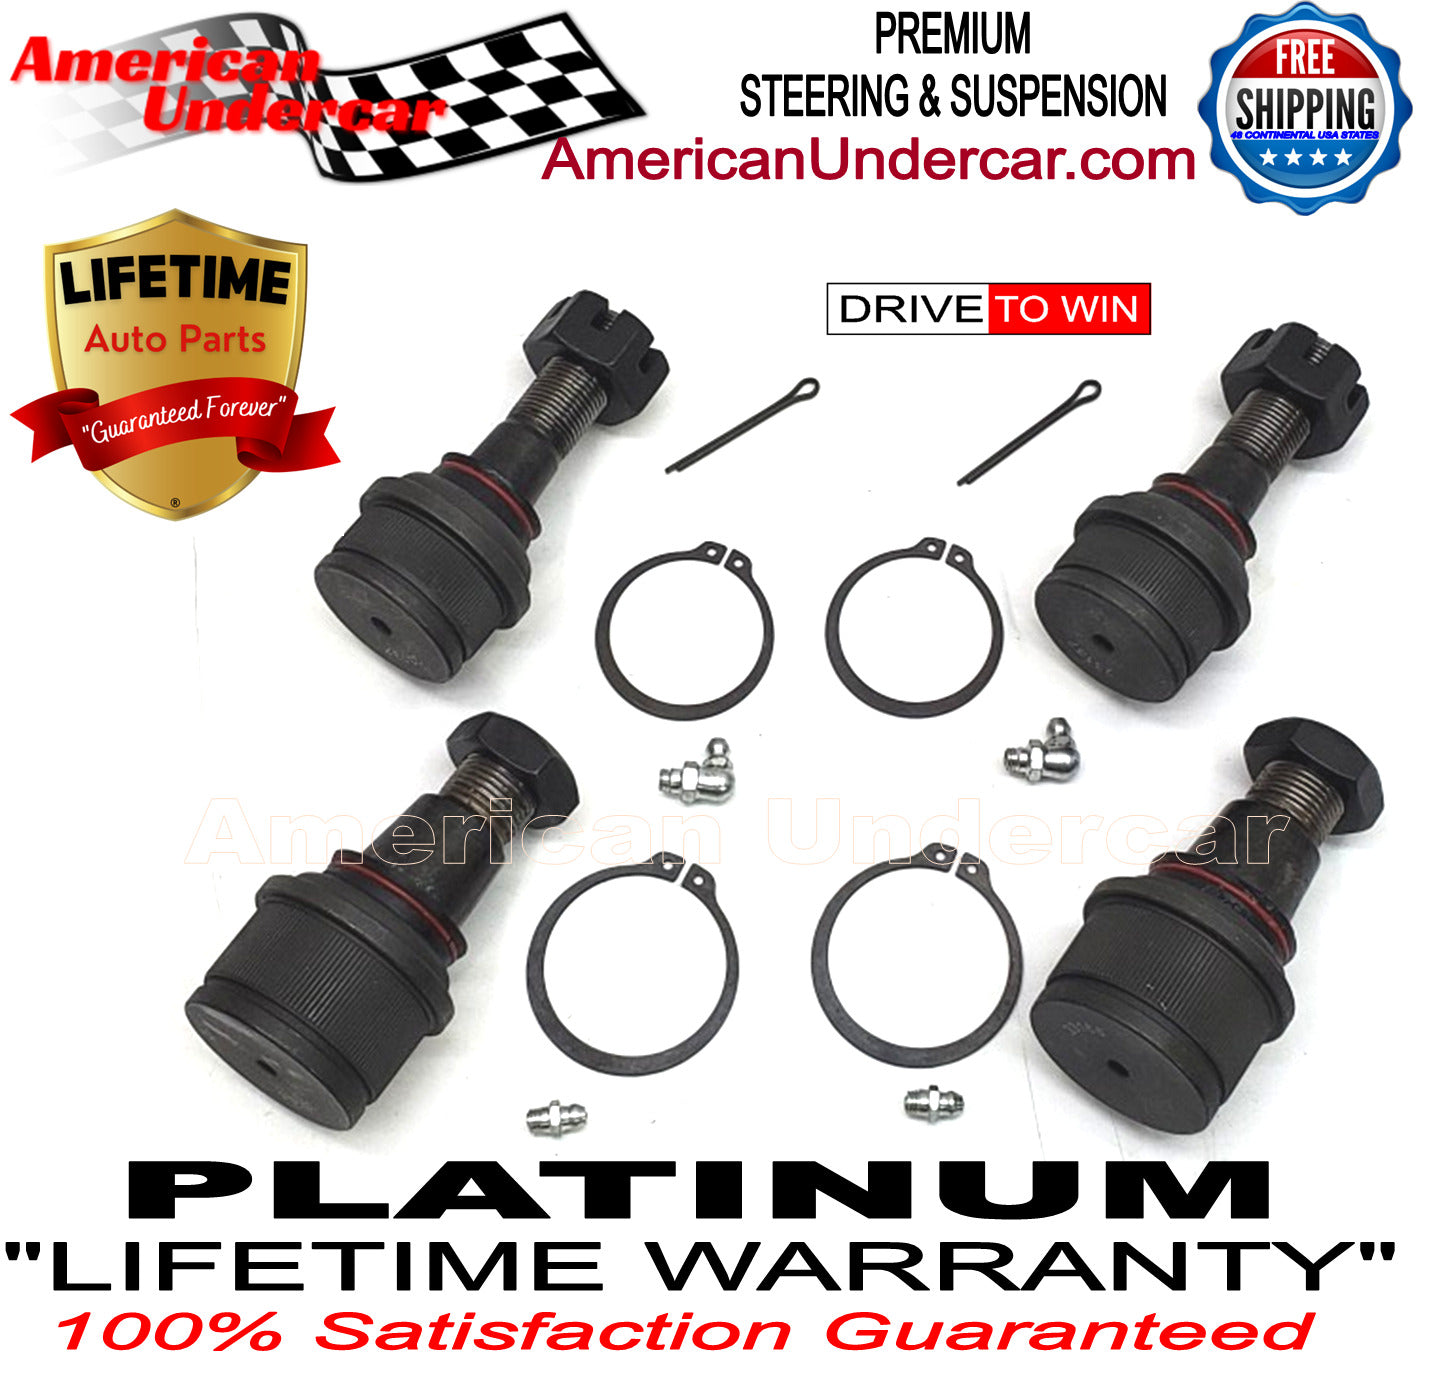 Lifetime Ball Joint Suspension Kit for 1985-1994 Ford F250 4x4 3850lb Axle